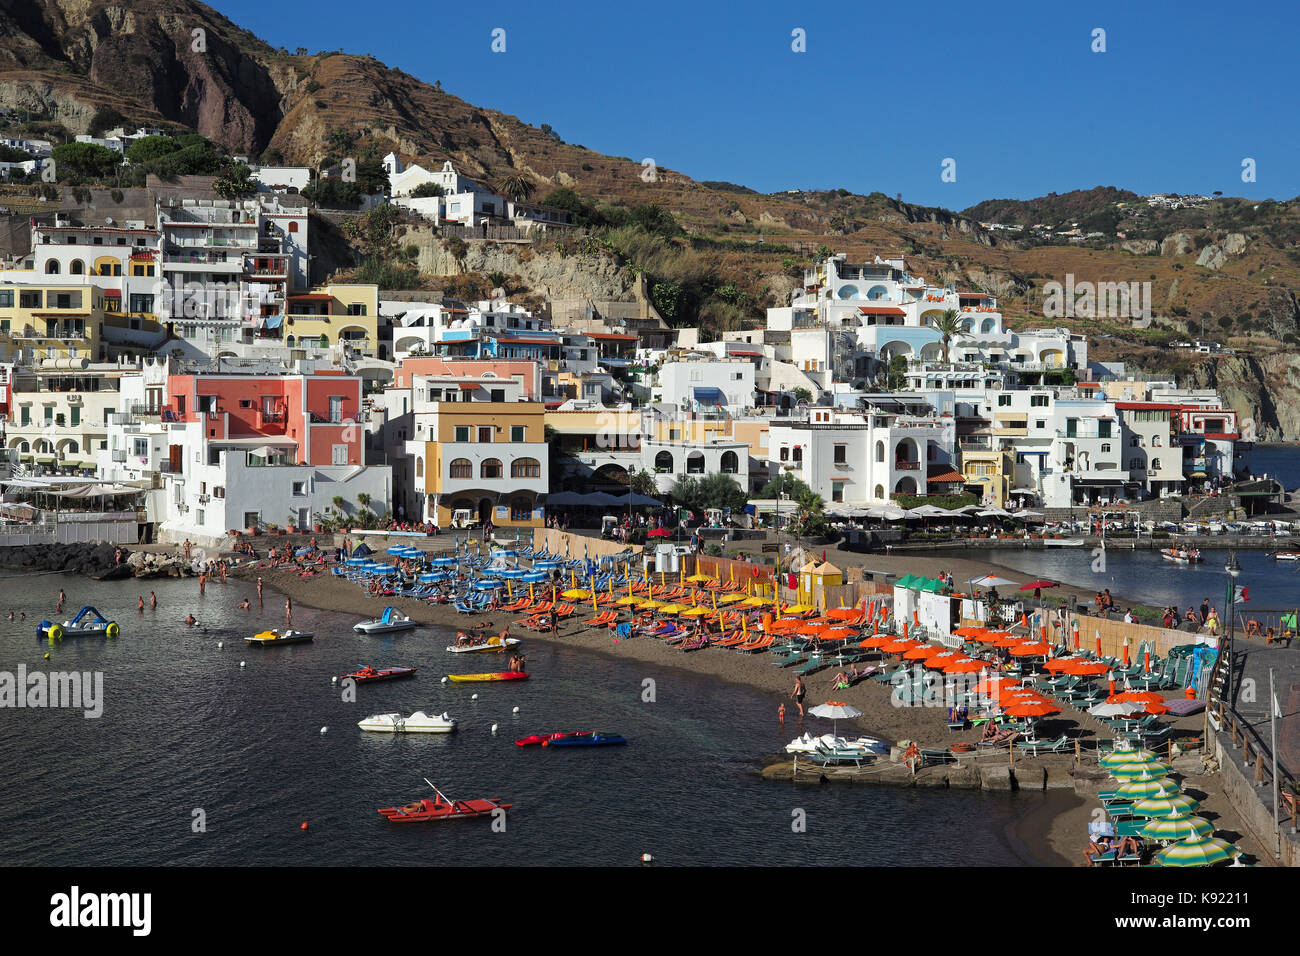 A view of the small town of Sant'Angelo, the seaside resort and fishing town on the rugged south coast on the Italian island of Ischia. Stock Photo